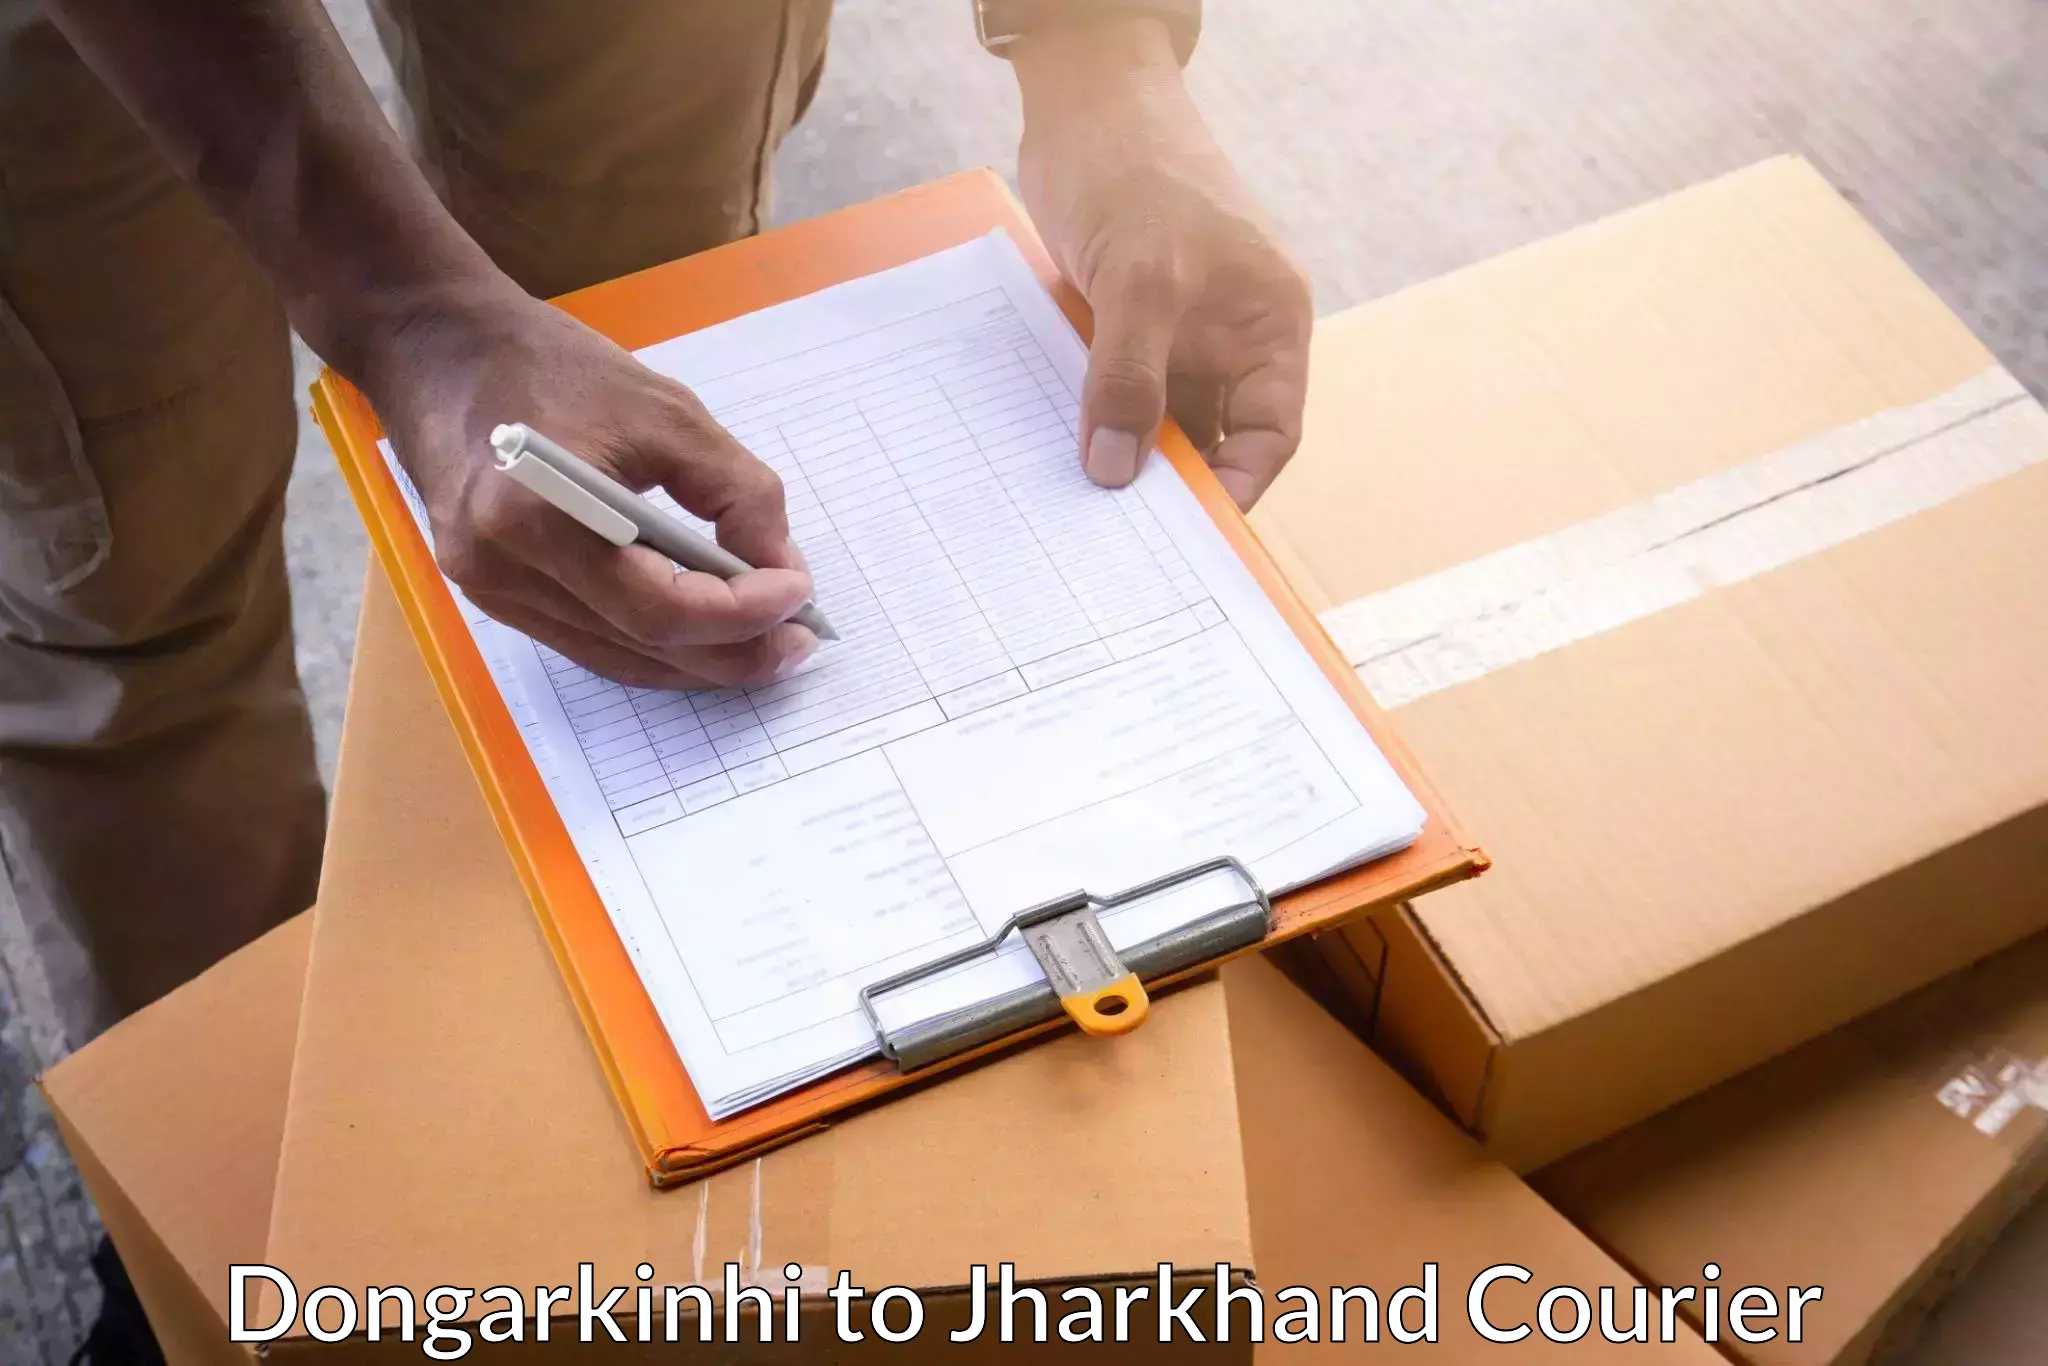 Efficient shipping operations Dongarkinhi to Jharkhand